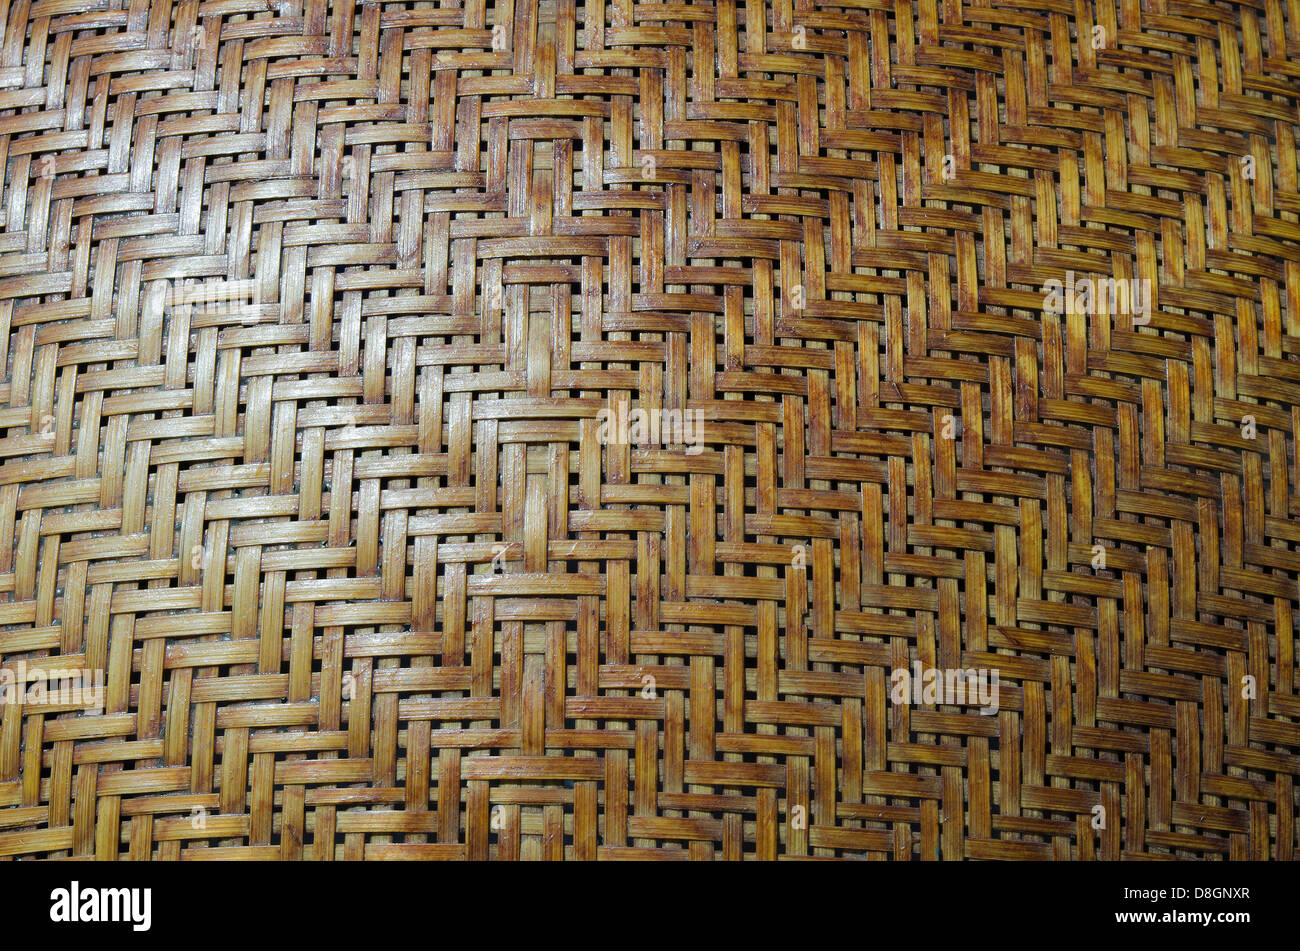 Basket making made from bamboo strip. Stock Photo